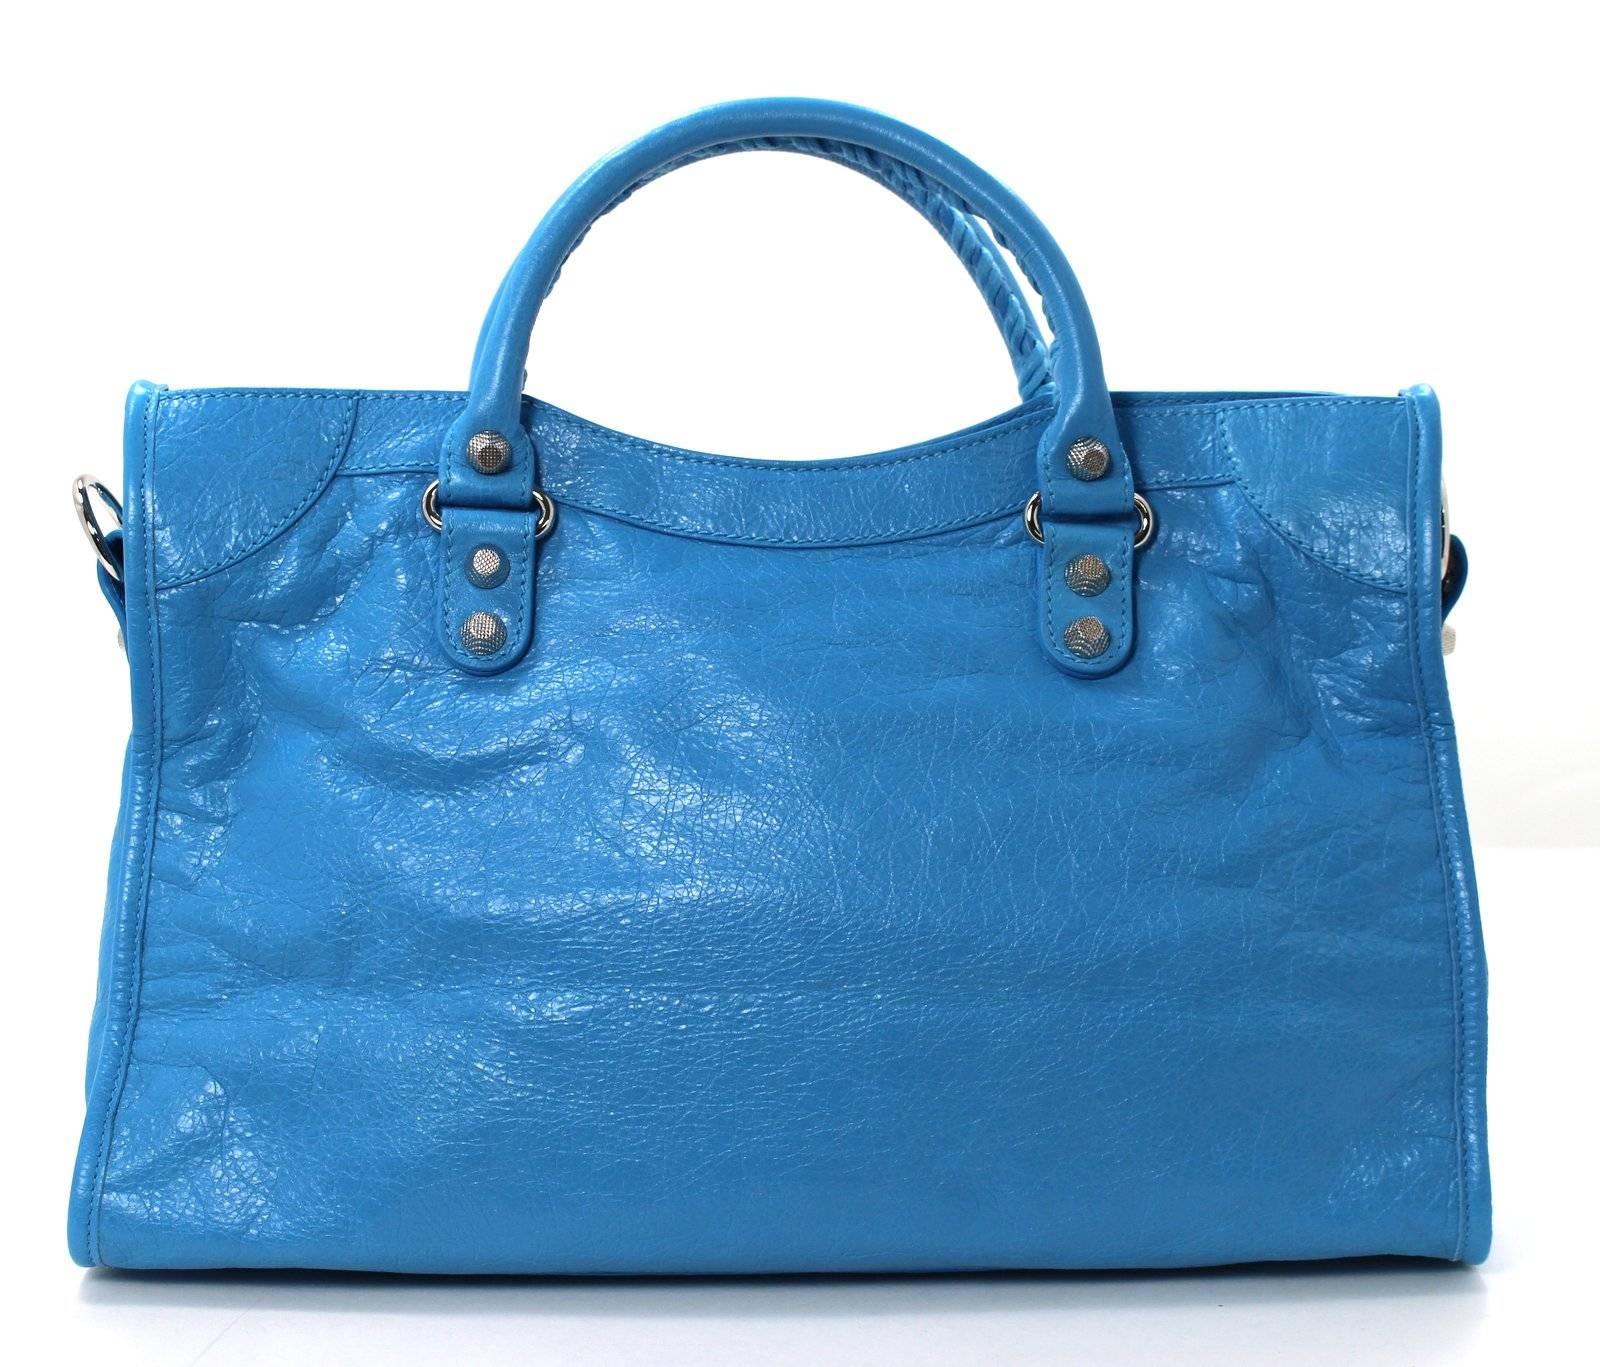 Balenciaga BLUE Giant City 12 Bag with Nickel Hardware- NEW; retail $1,985.00 plus taxes
The iconic Balenciaga silhouette is recreated each season in exciting new and classic colors.  The brighter hues are always the most sought after by Balenciaga